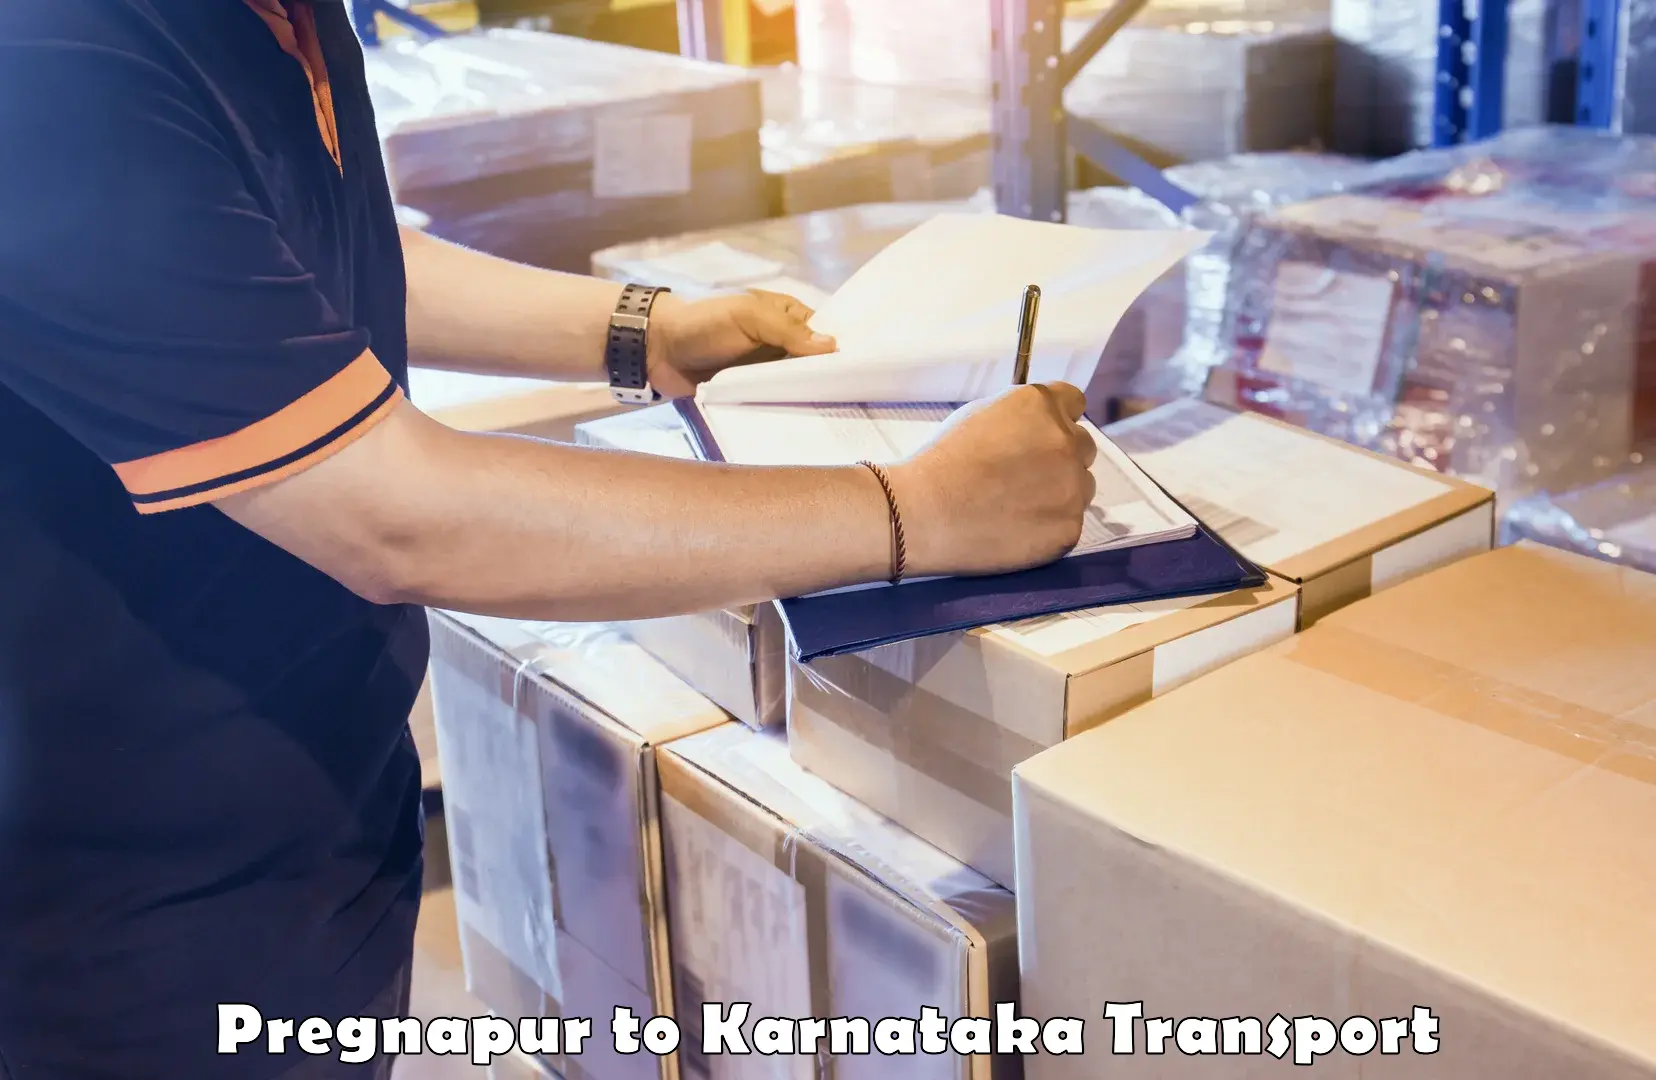 Truck transport companies in India in Pregnapur to Bhatkal